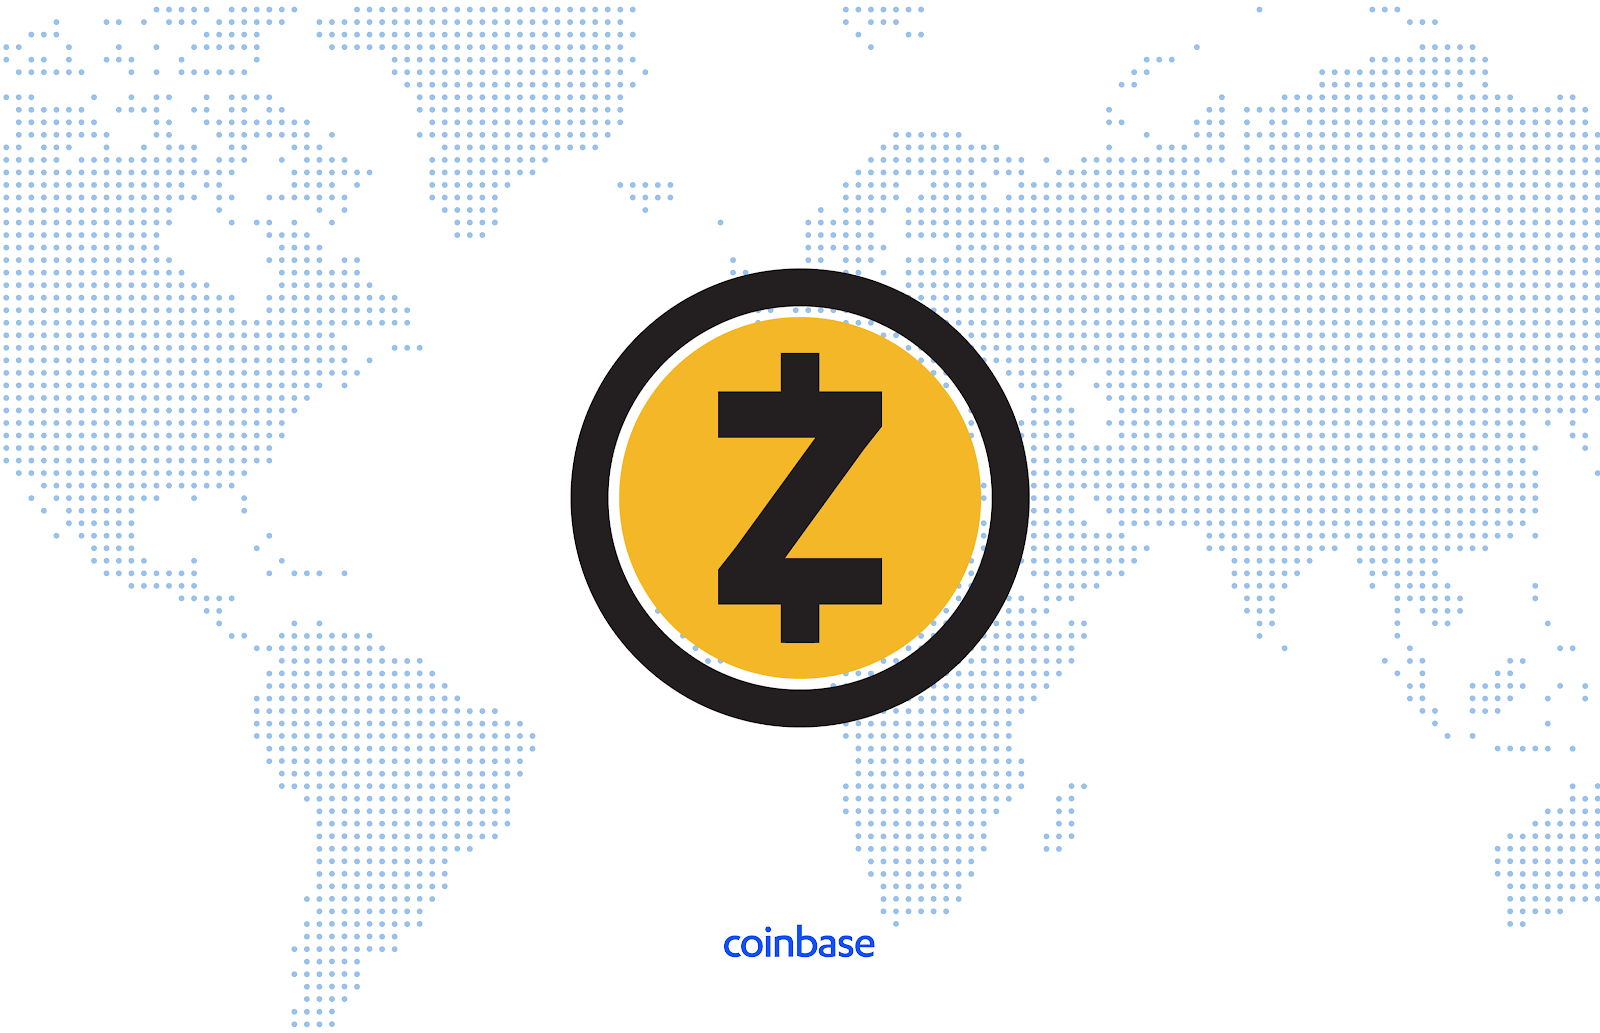 ZCash (ZEC) Now Live on Coinbase and Its Mobile Apps 10